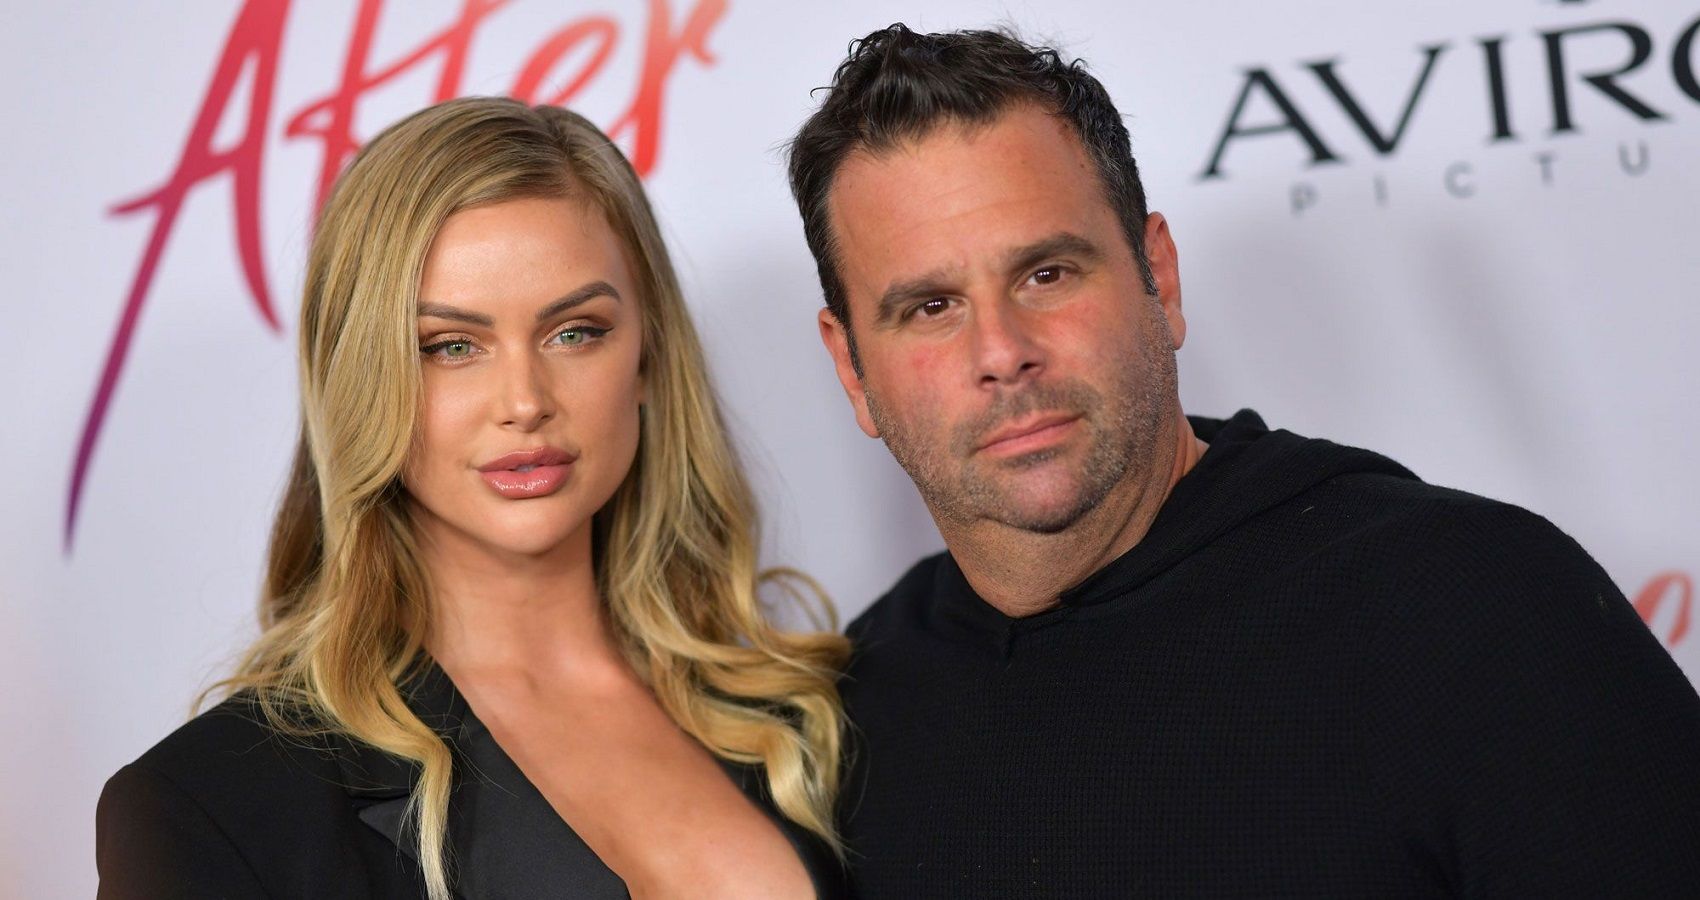 Lala Kent Says She Is 'In Love' After Her Split From Randall